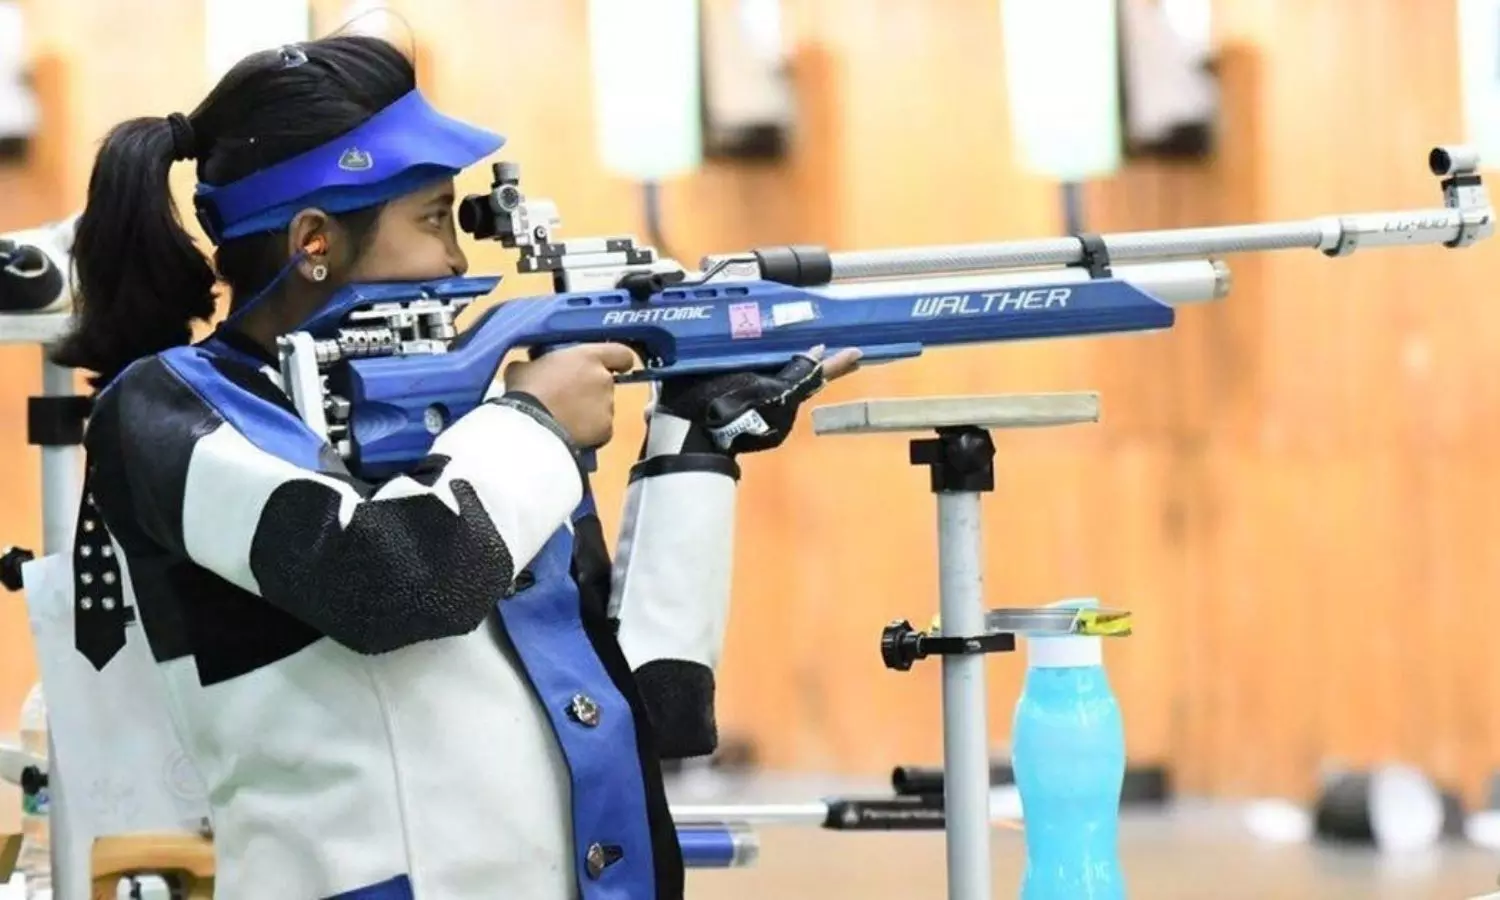 Mehuli Ghosh wins women's 10m air rifle event at national shooting trials